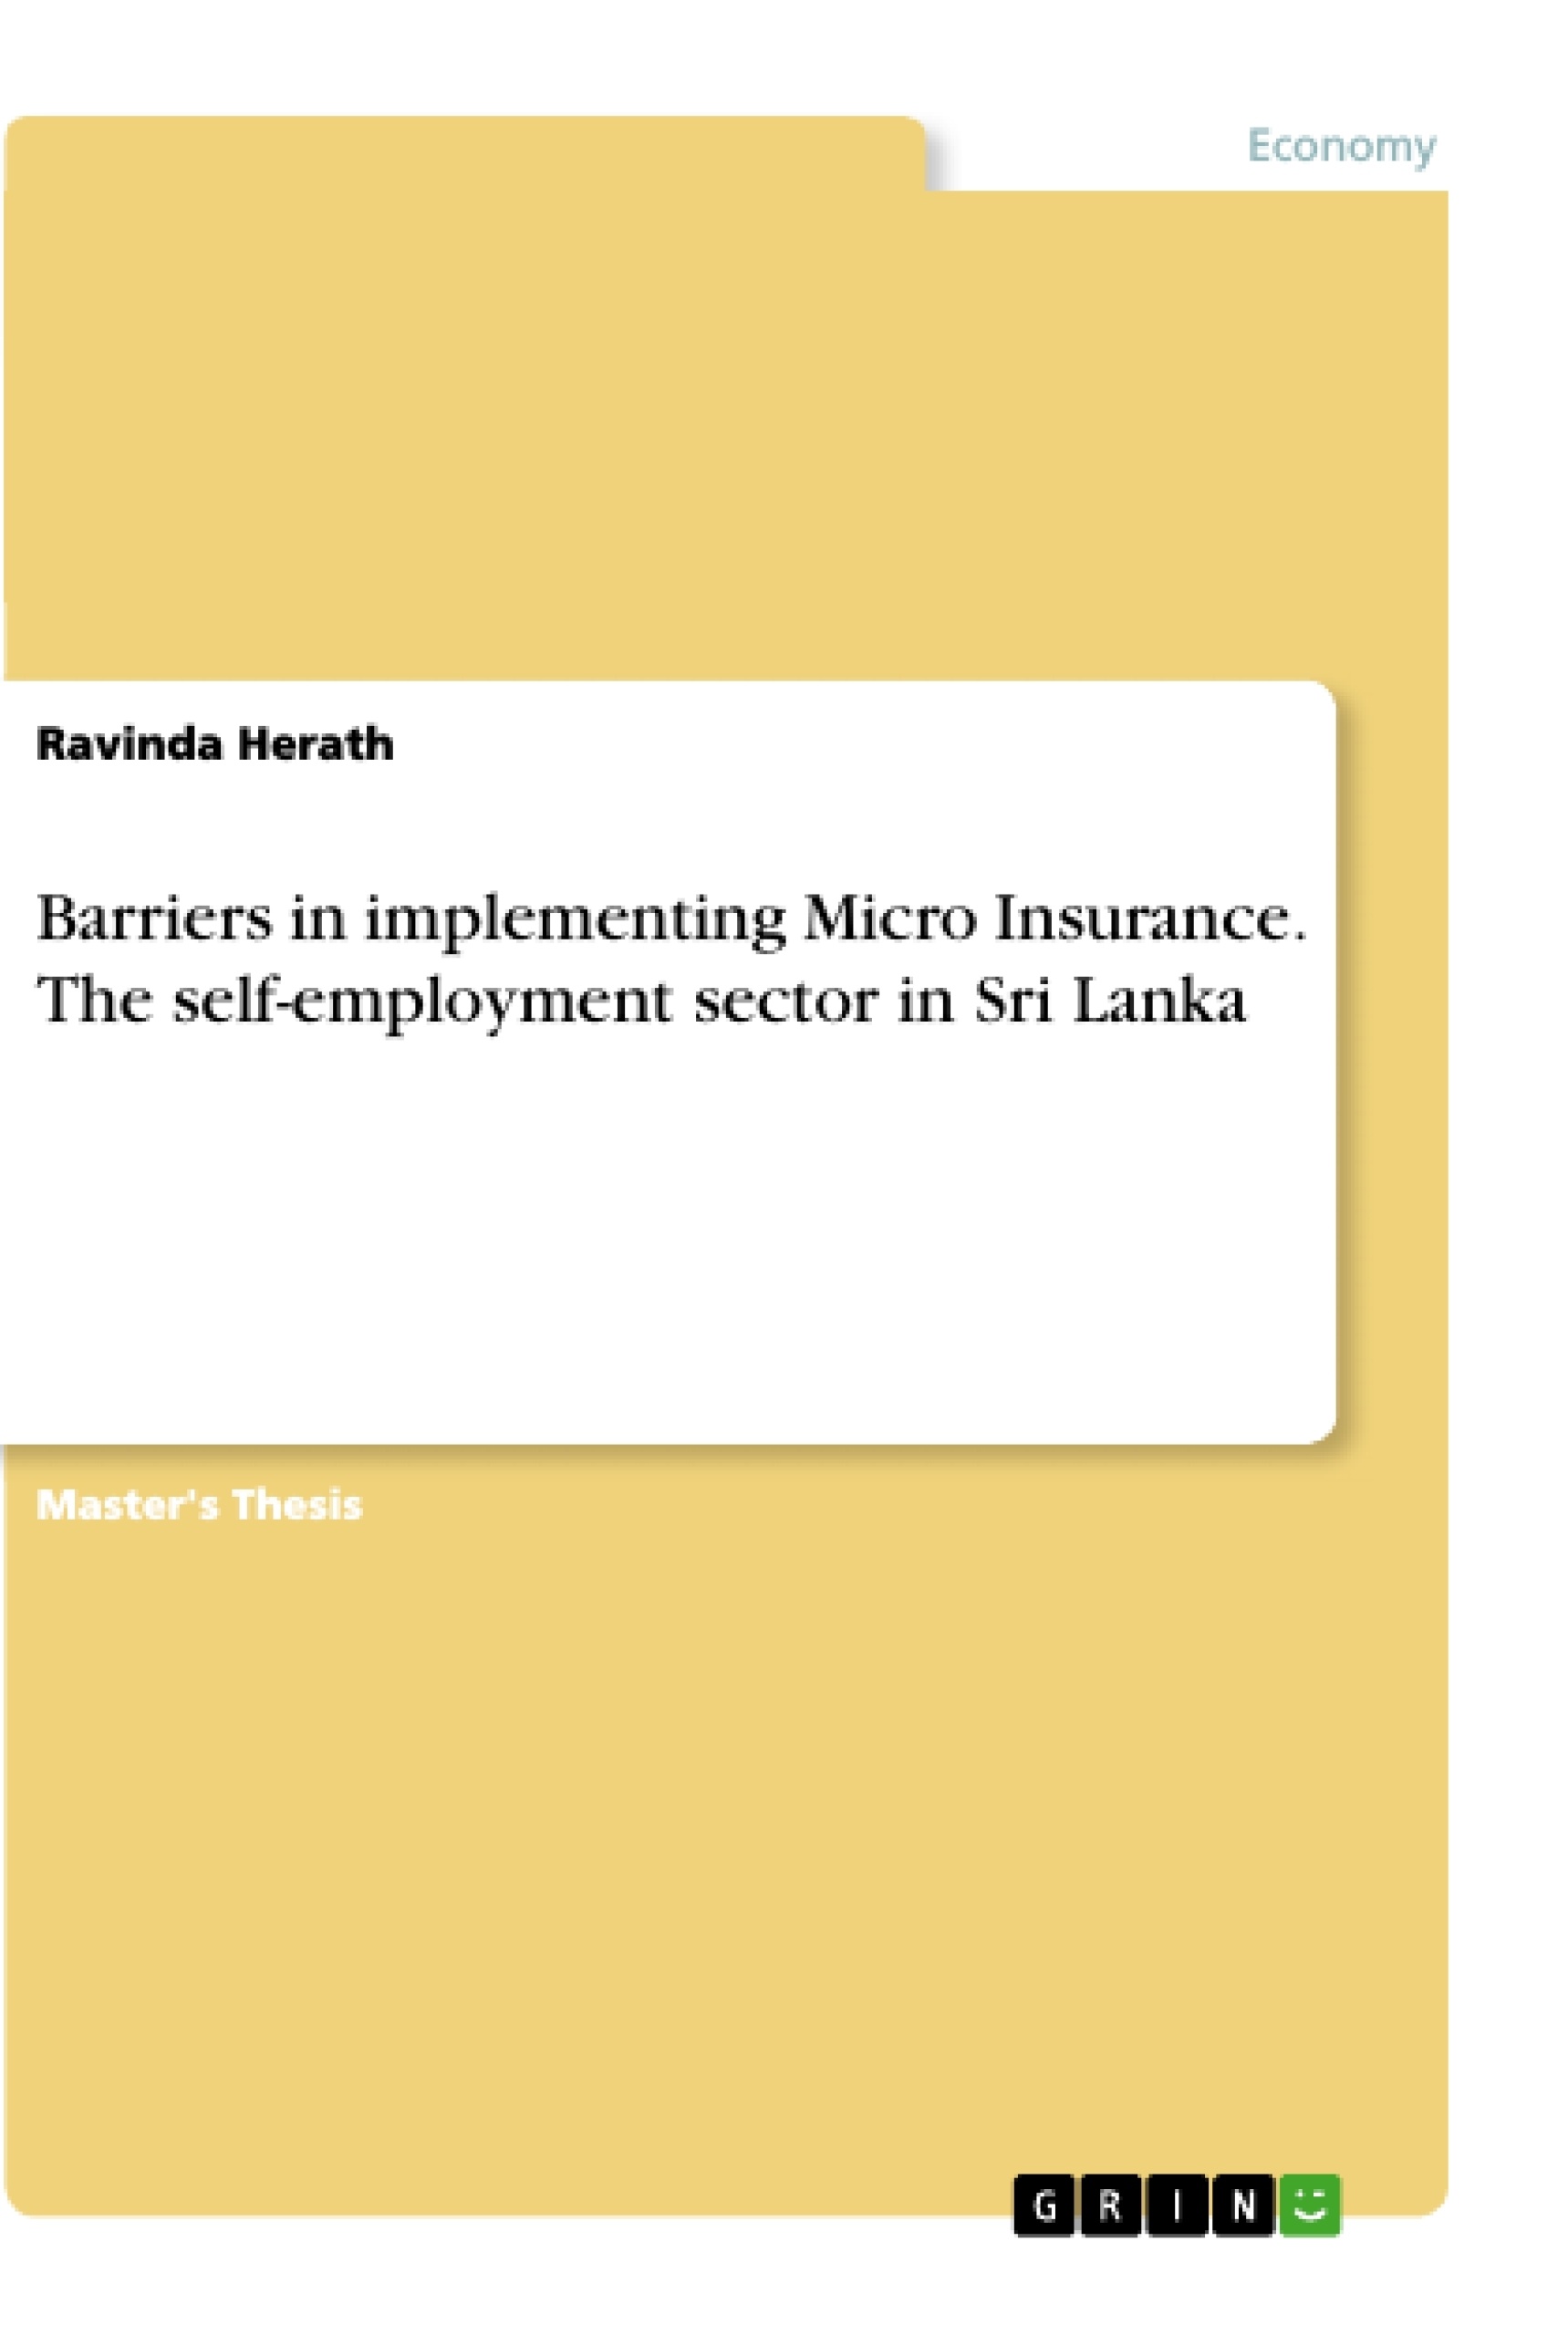 Titre: Barriers in implementing Micro Insurance. The self-employment sector in Sri Lanka